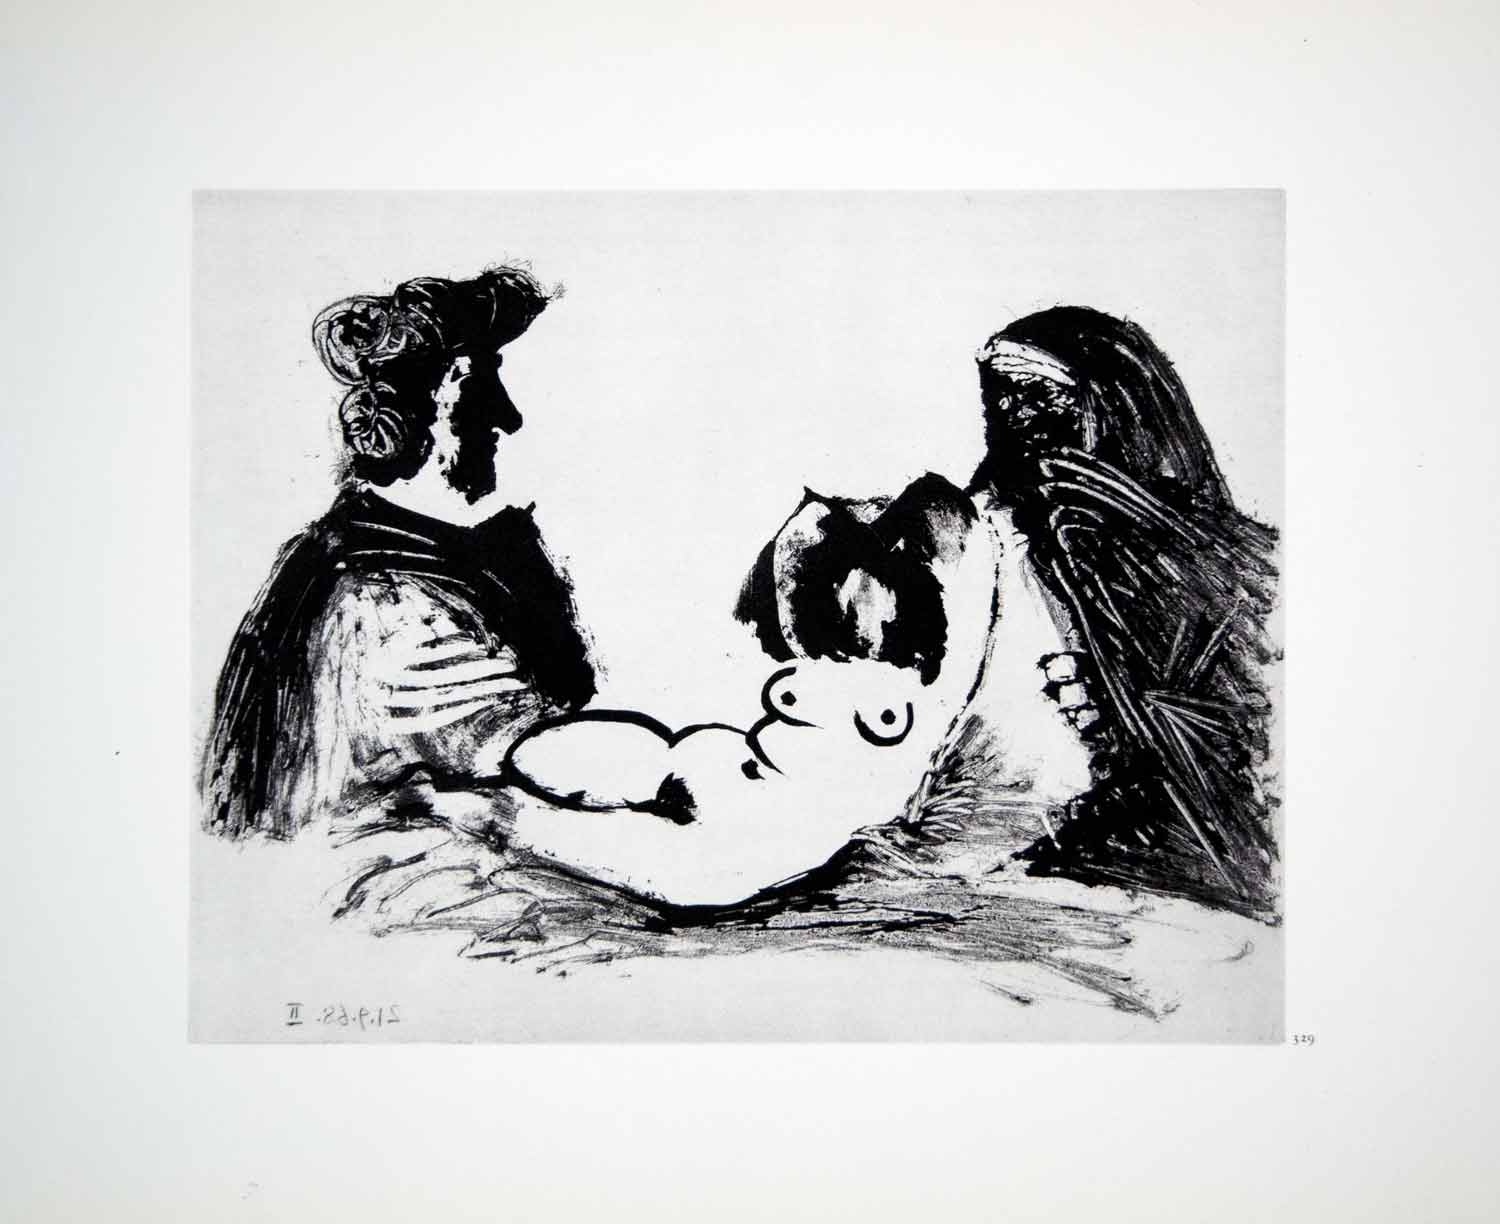 1970 Heliogravure Pablo Picasso Reclining Nude Female Figure Abstract Art P347B